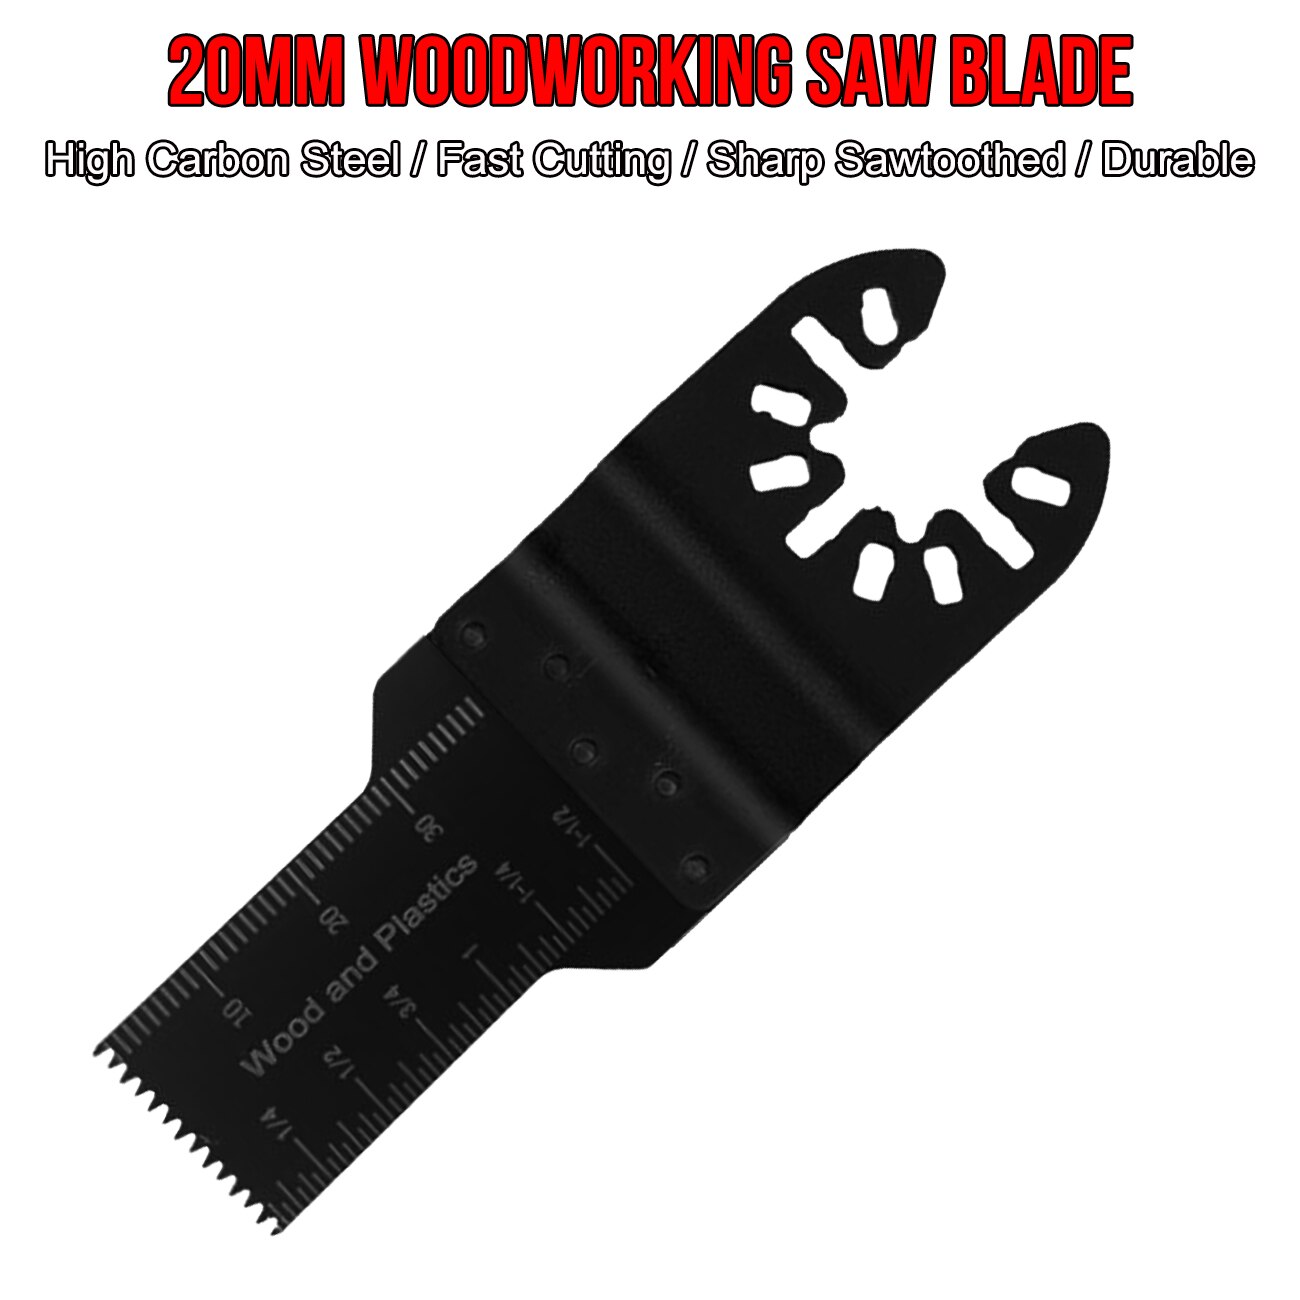 10X 20MM Woodworking Saw Blades Multi-function Oscillating Cutting Replacement Renovator Trimmer Tool